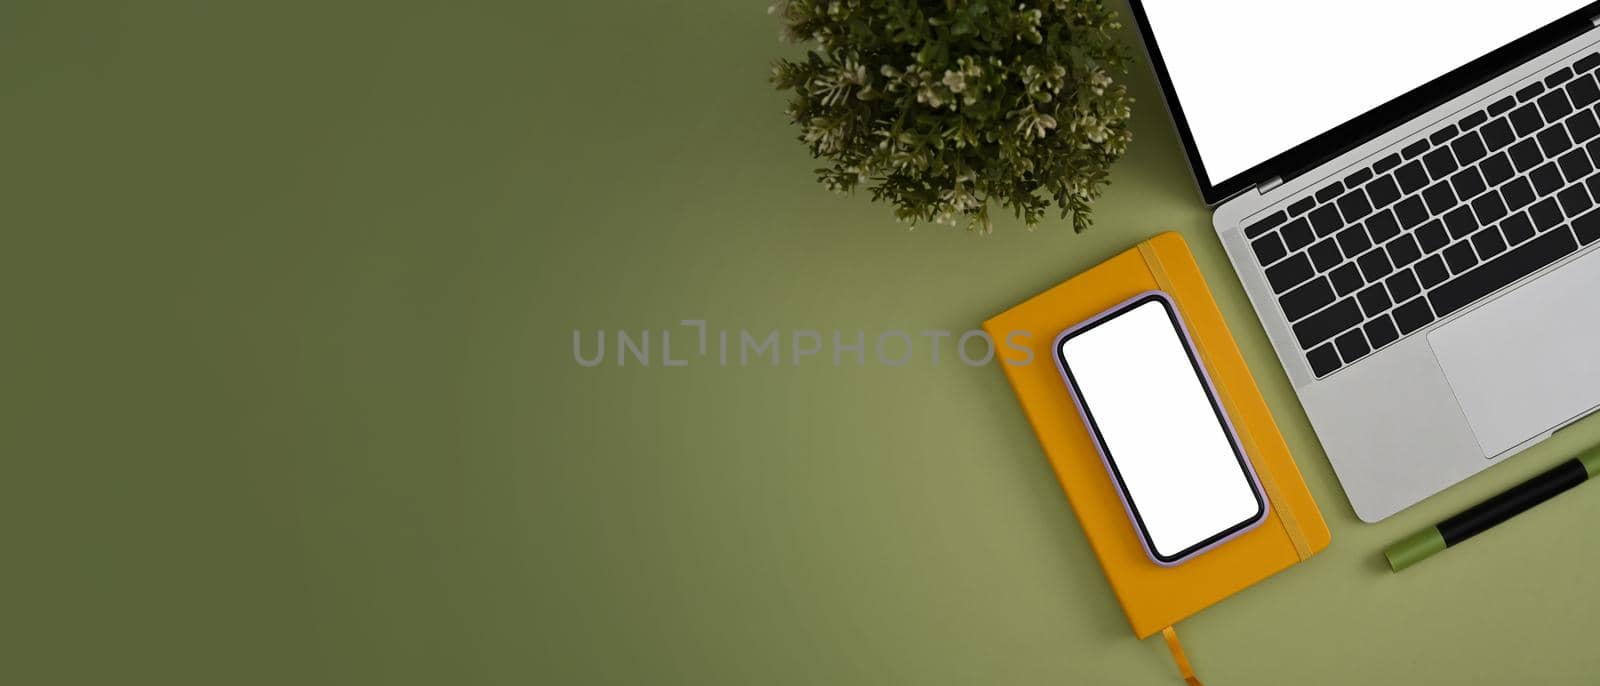 Top view mobile phone, laptop computer, notebook and houseplant on green background. by prathanchorruangsak